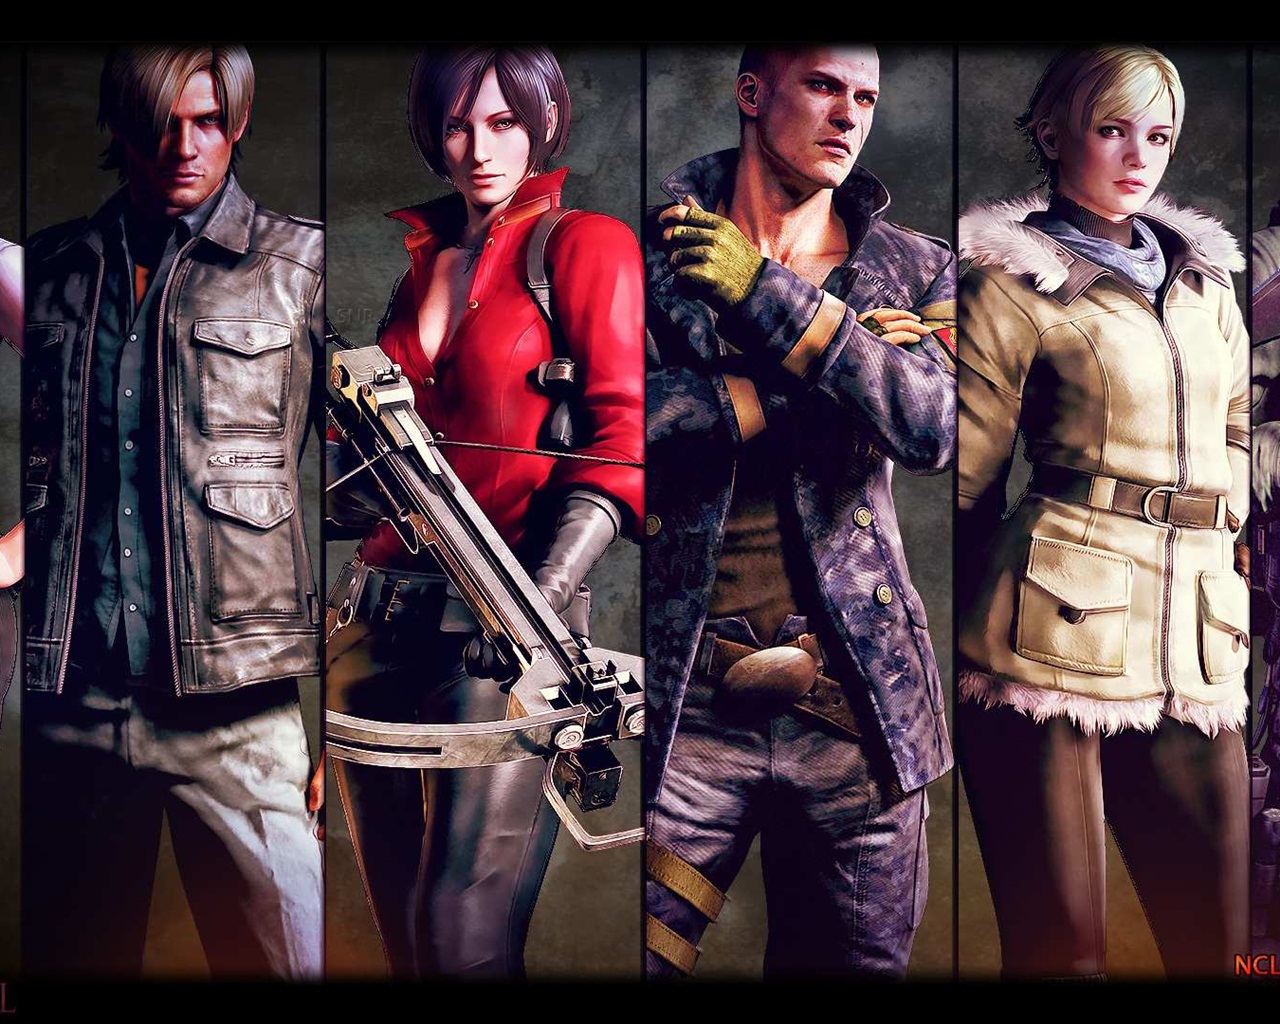 Resident Evil 6 HD game wallpapers #11 - 1280x1024